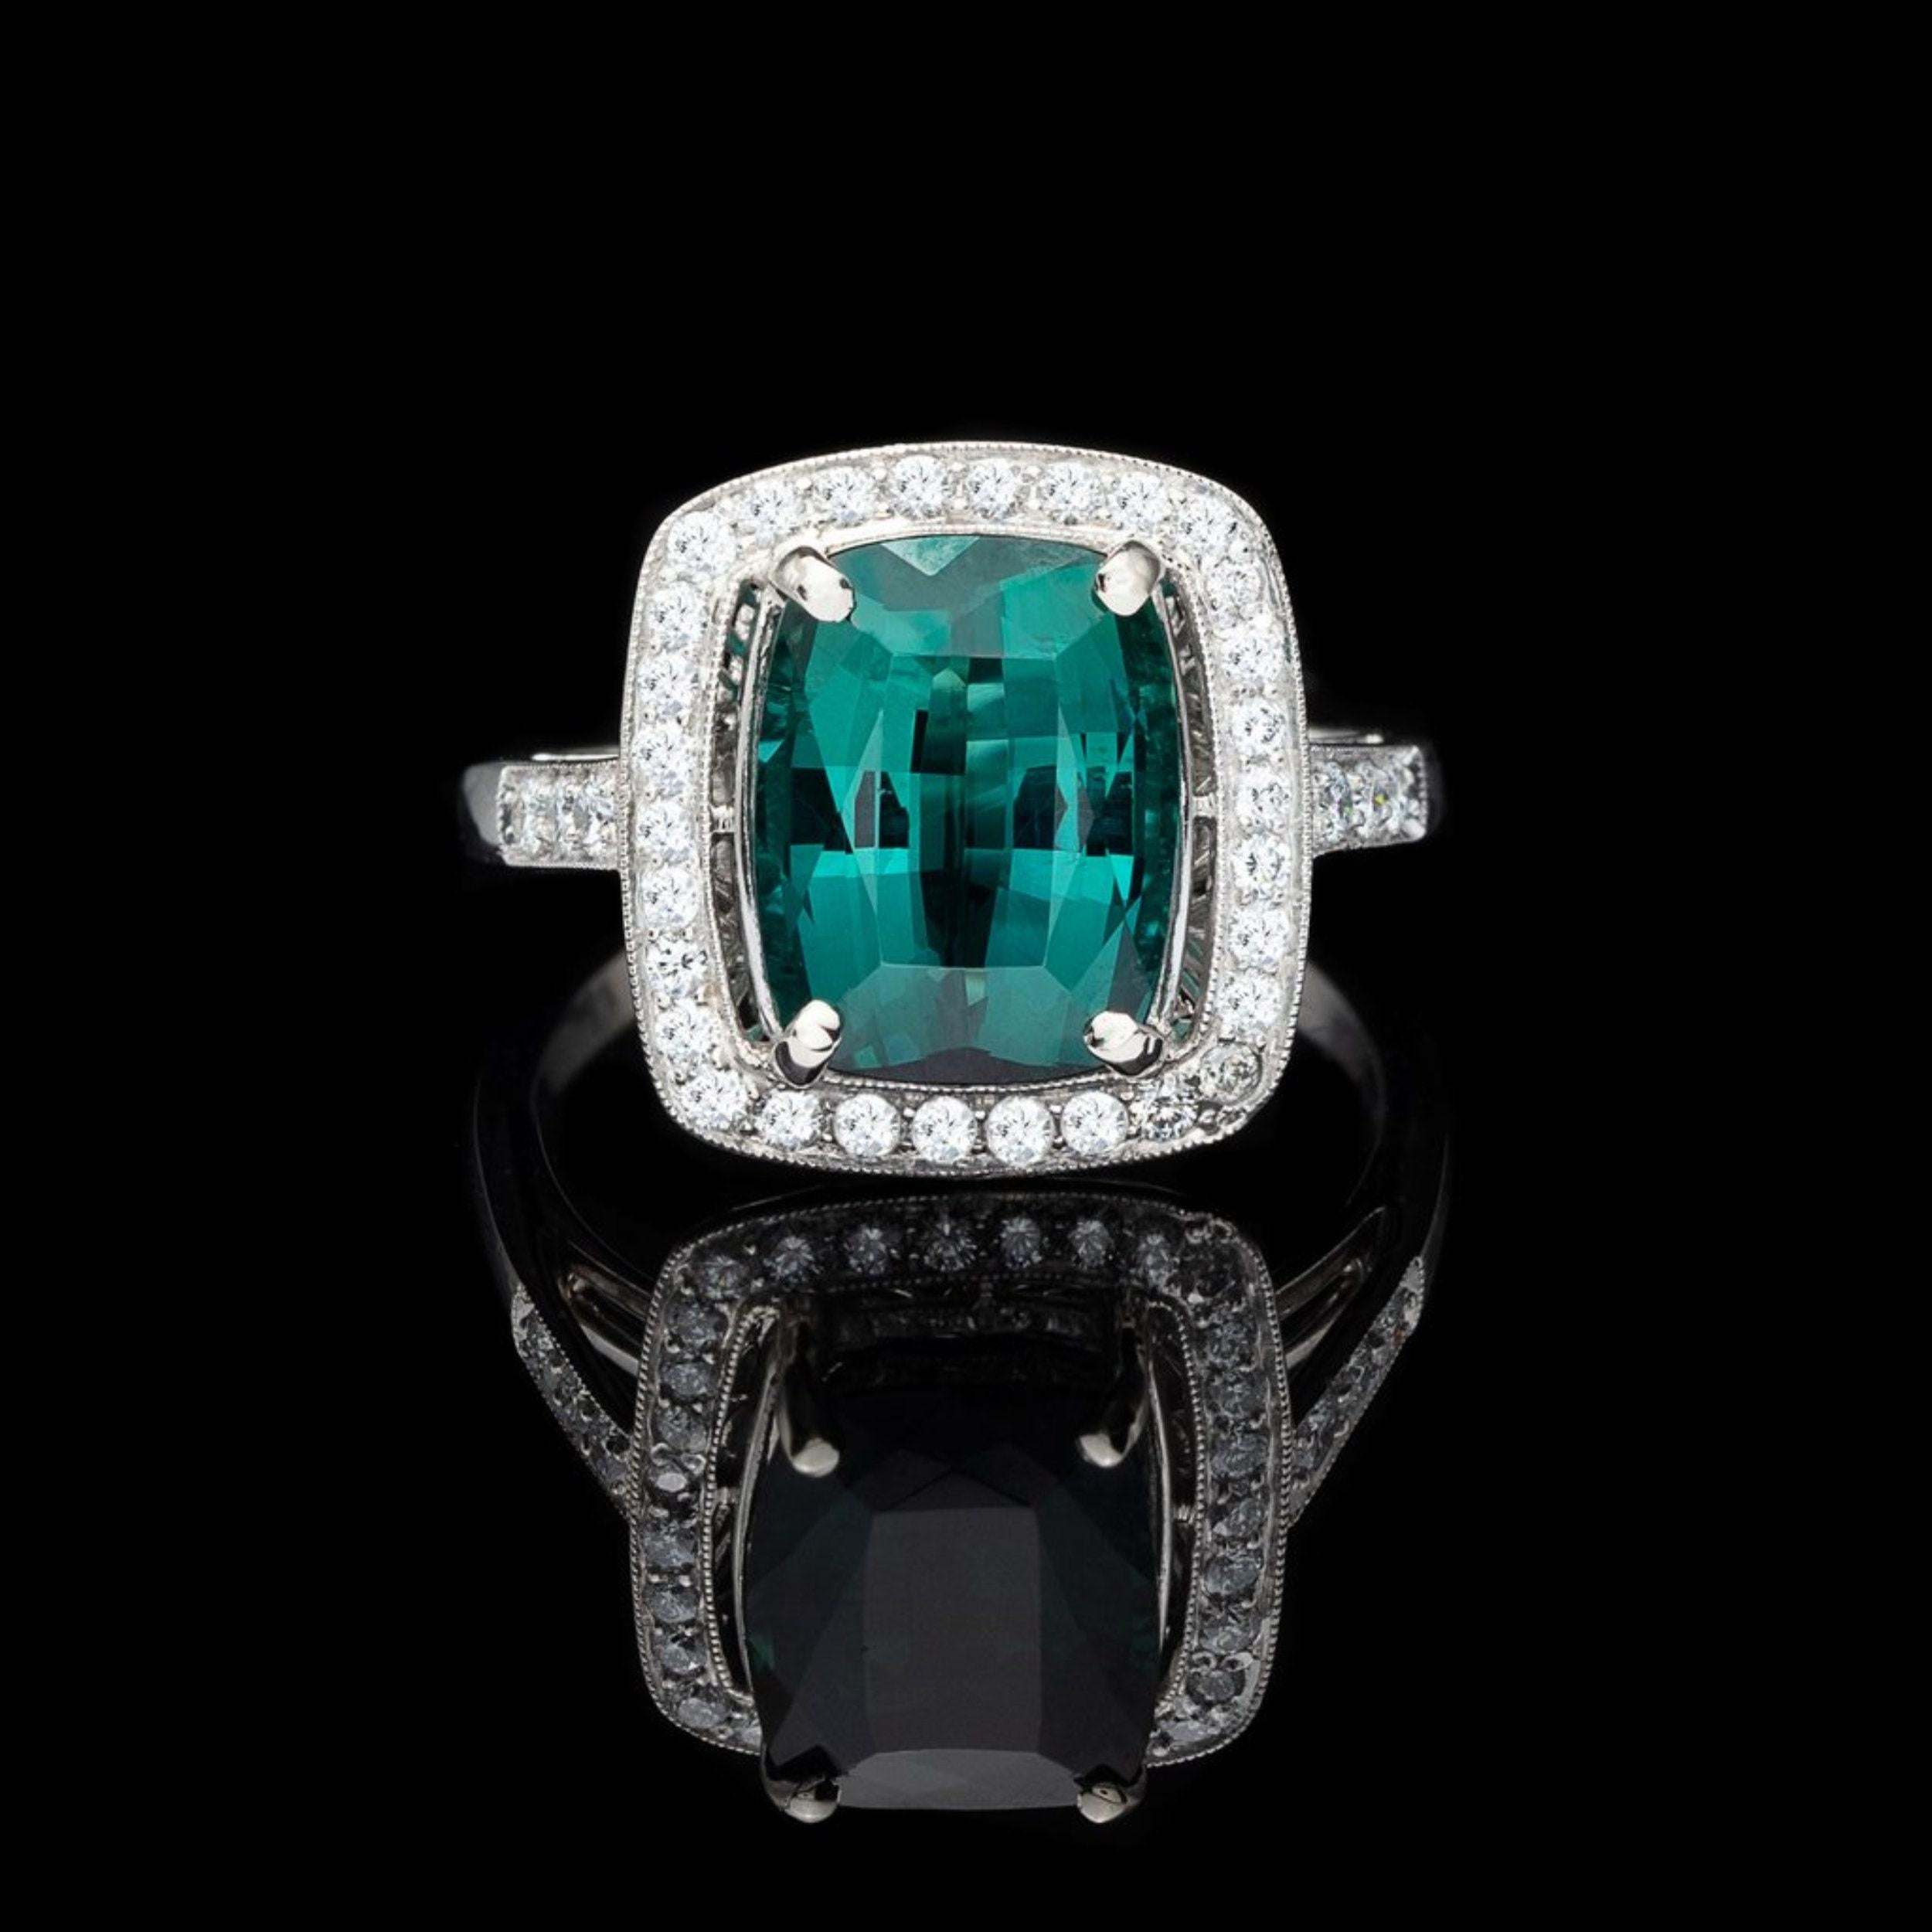 For Sale:  4 Carat Cushion Cut Emerald Engagement Ring Vintage Emerald White Gold Ring 4